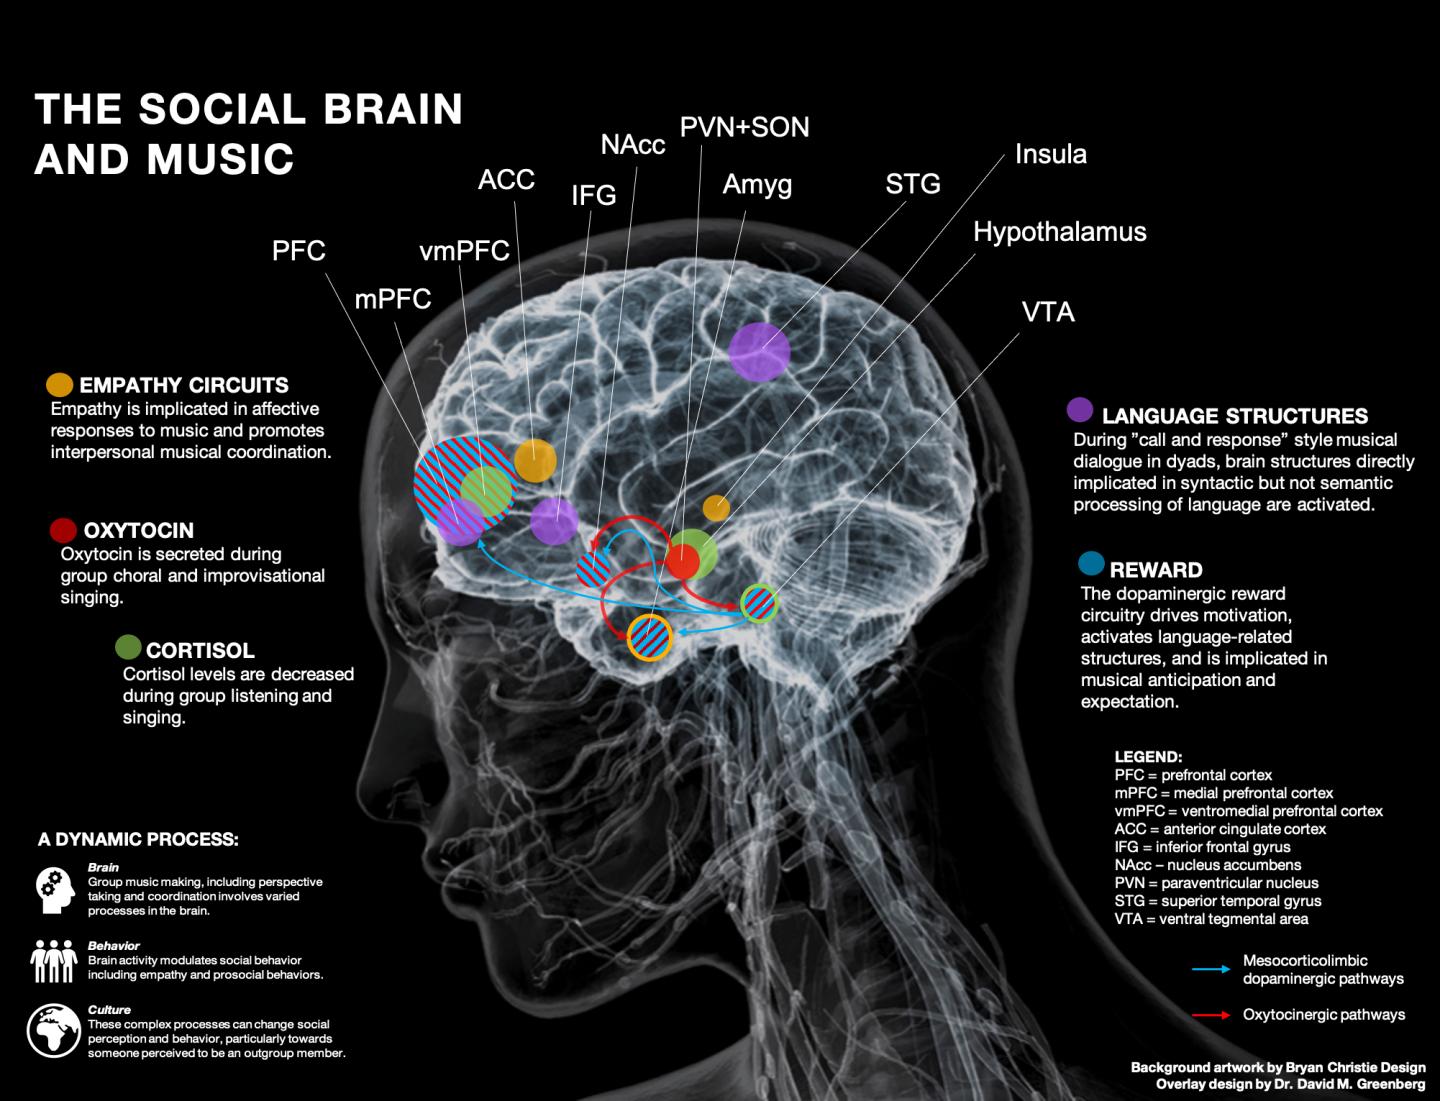 What happens in the brain when people make music together?